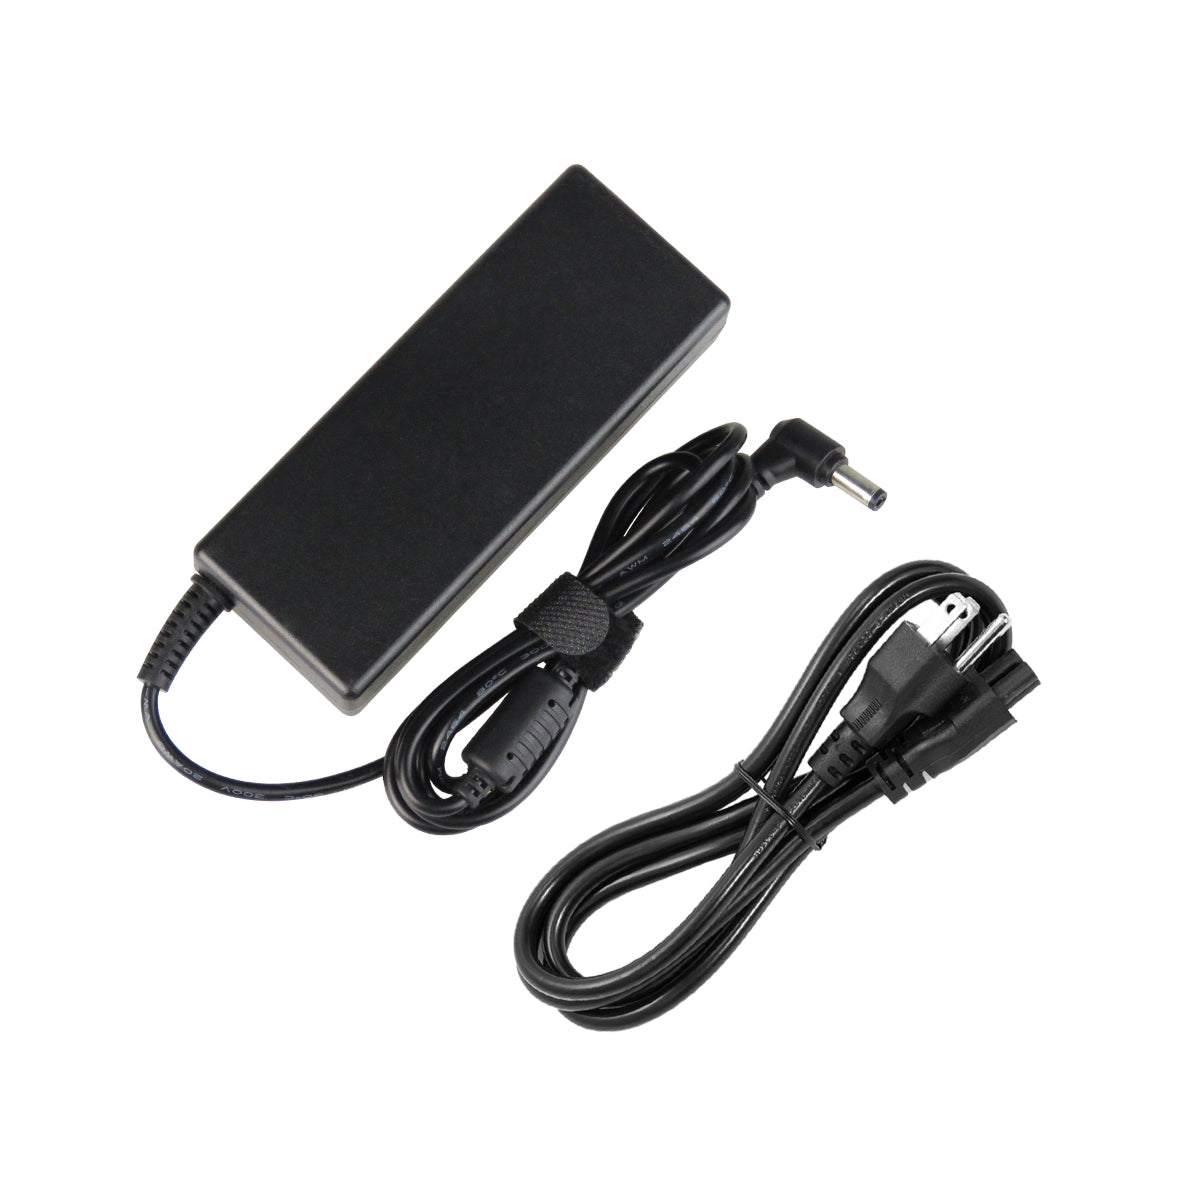 AC Adapter Charger for ASUS u52f Series Notebook.